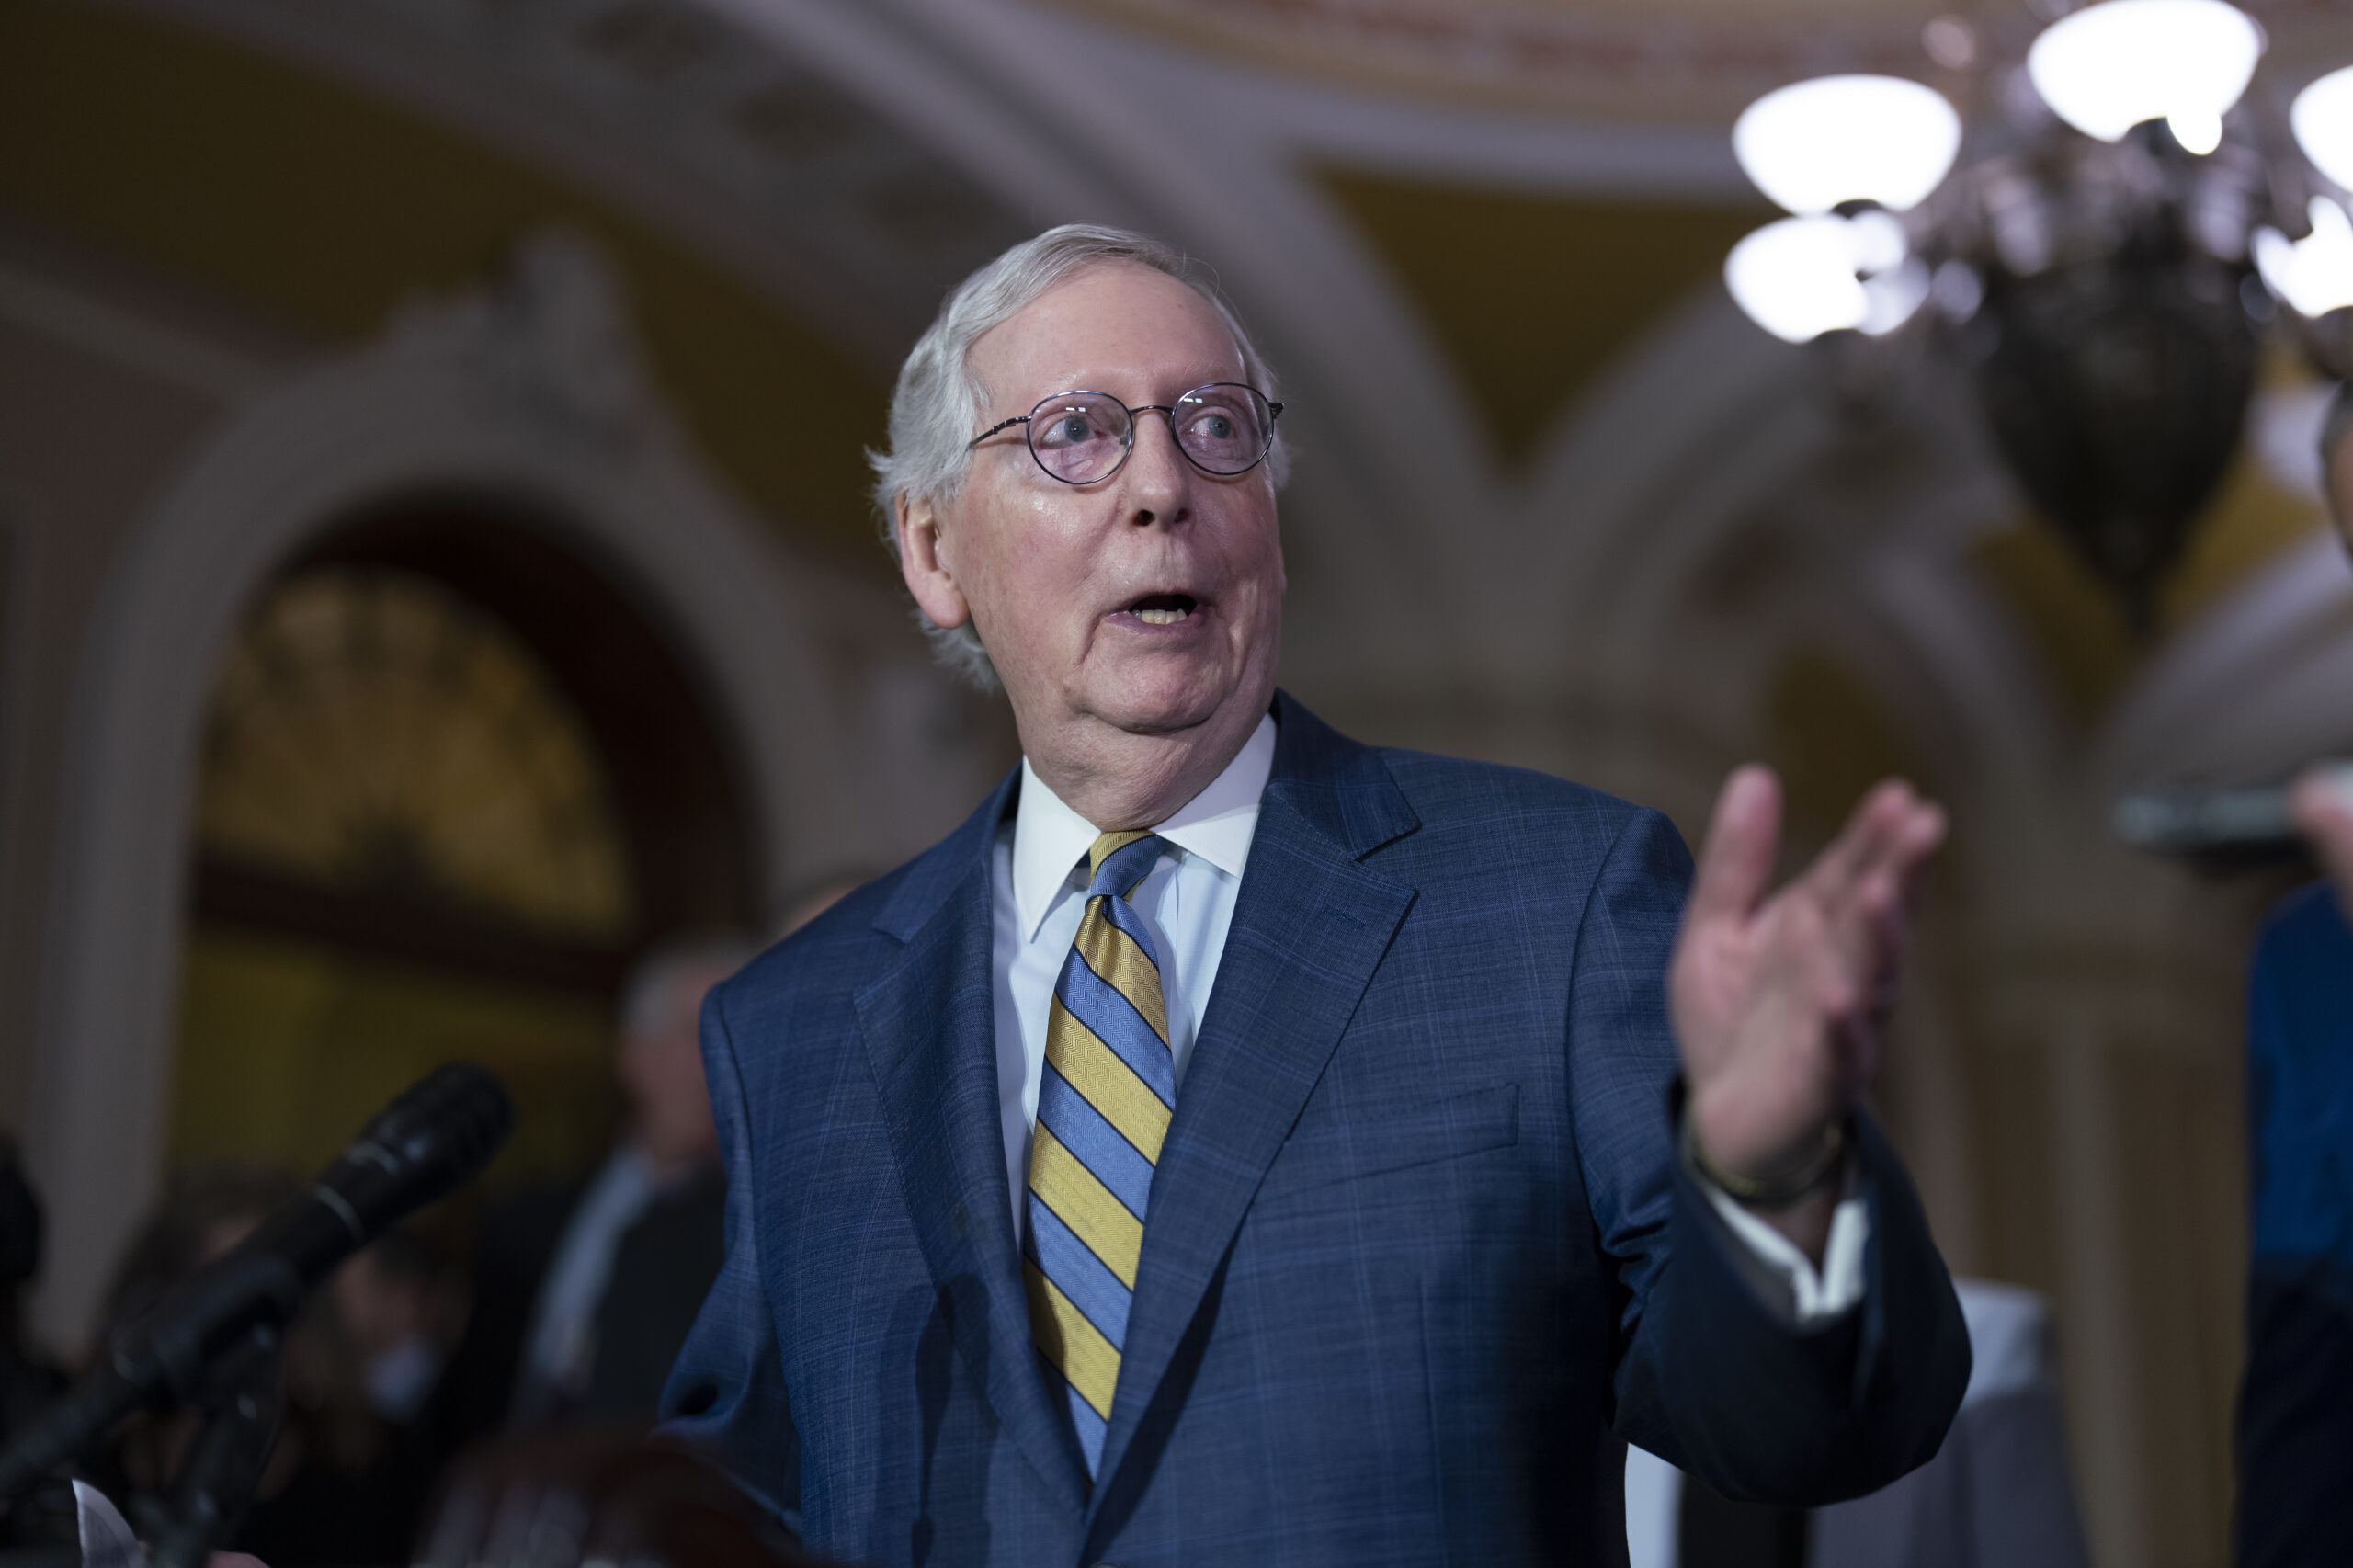 Senate Minority Leader Mitch McConnell, R-Ky., speaks to reporters following a closed-door policy m...